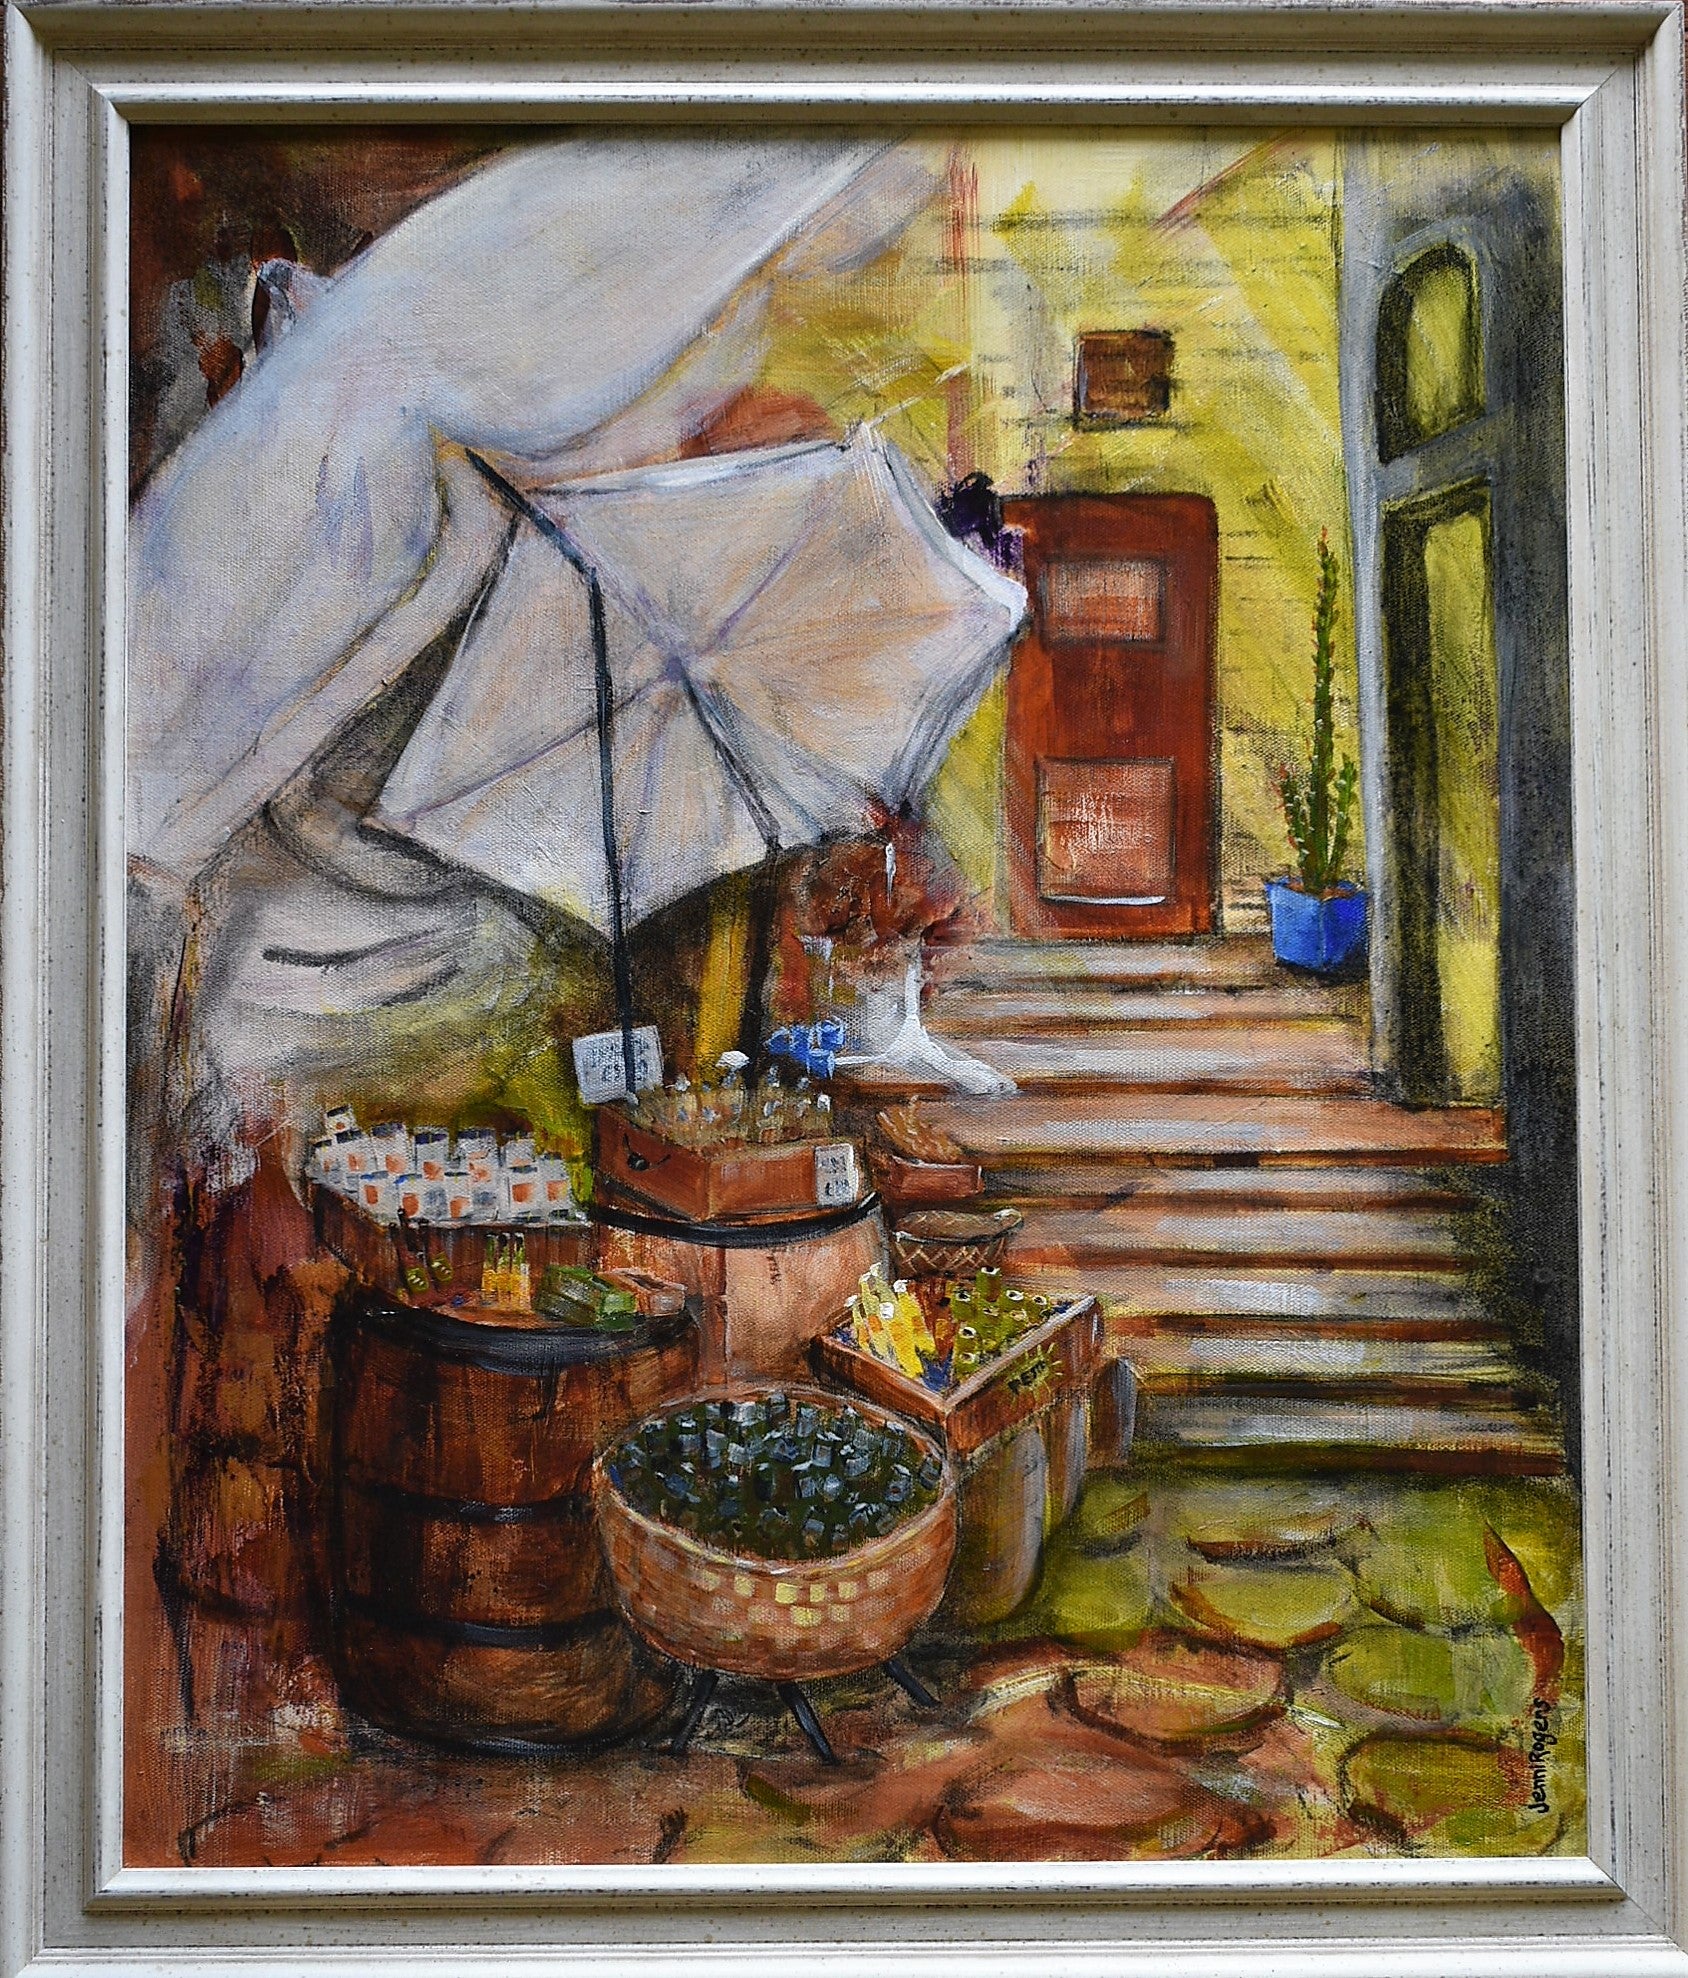 Fruits der mer is a  painting of a summer Market with quaint cobblestone streets, ocean breeze and fresh seafood straight off the fishing boat by Australian artist Jenni Rogers.